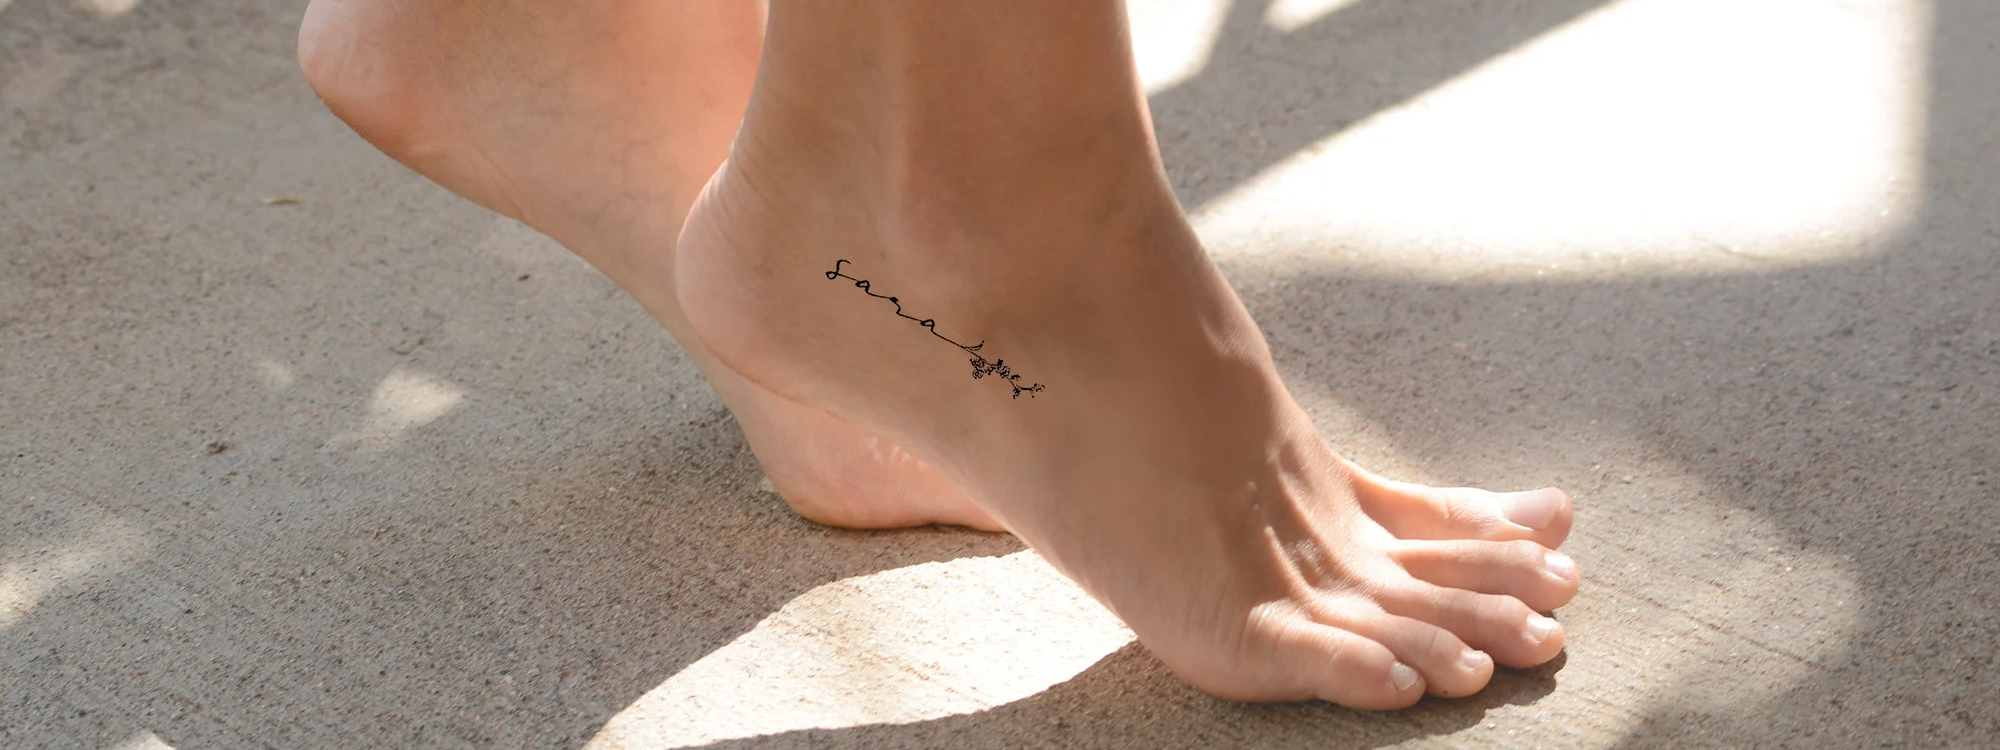 Celebrity Sole Tattoos on the Bottom of the Foot | POPSUGAR Beauty